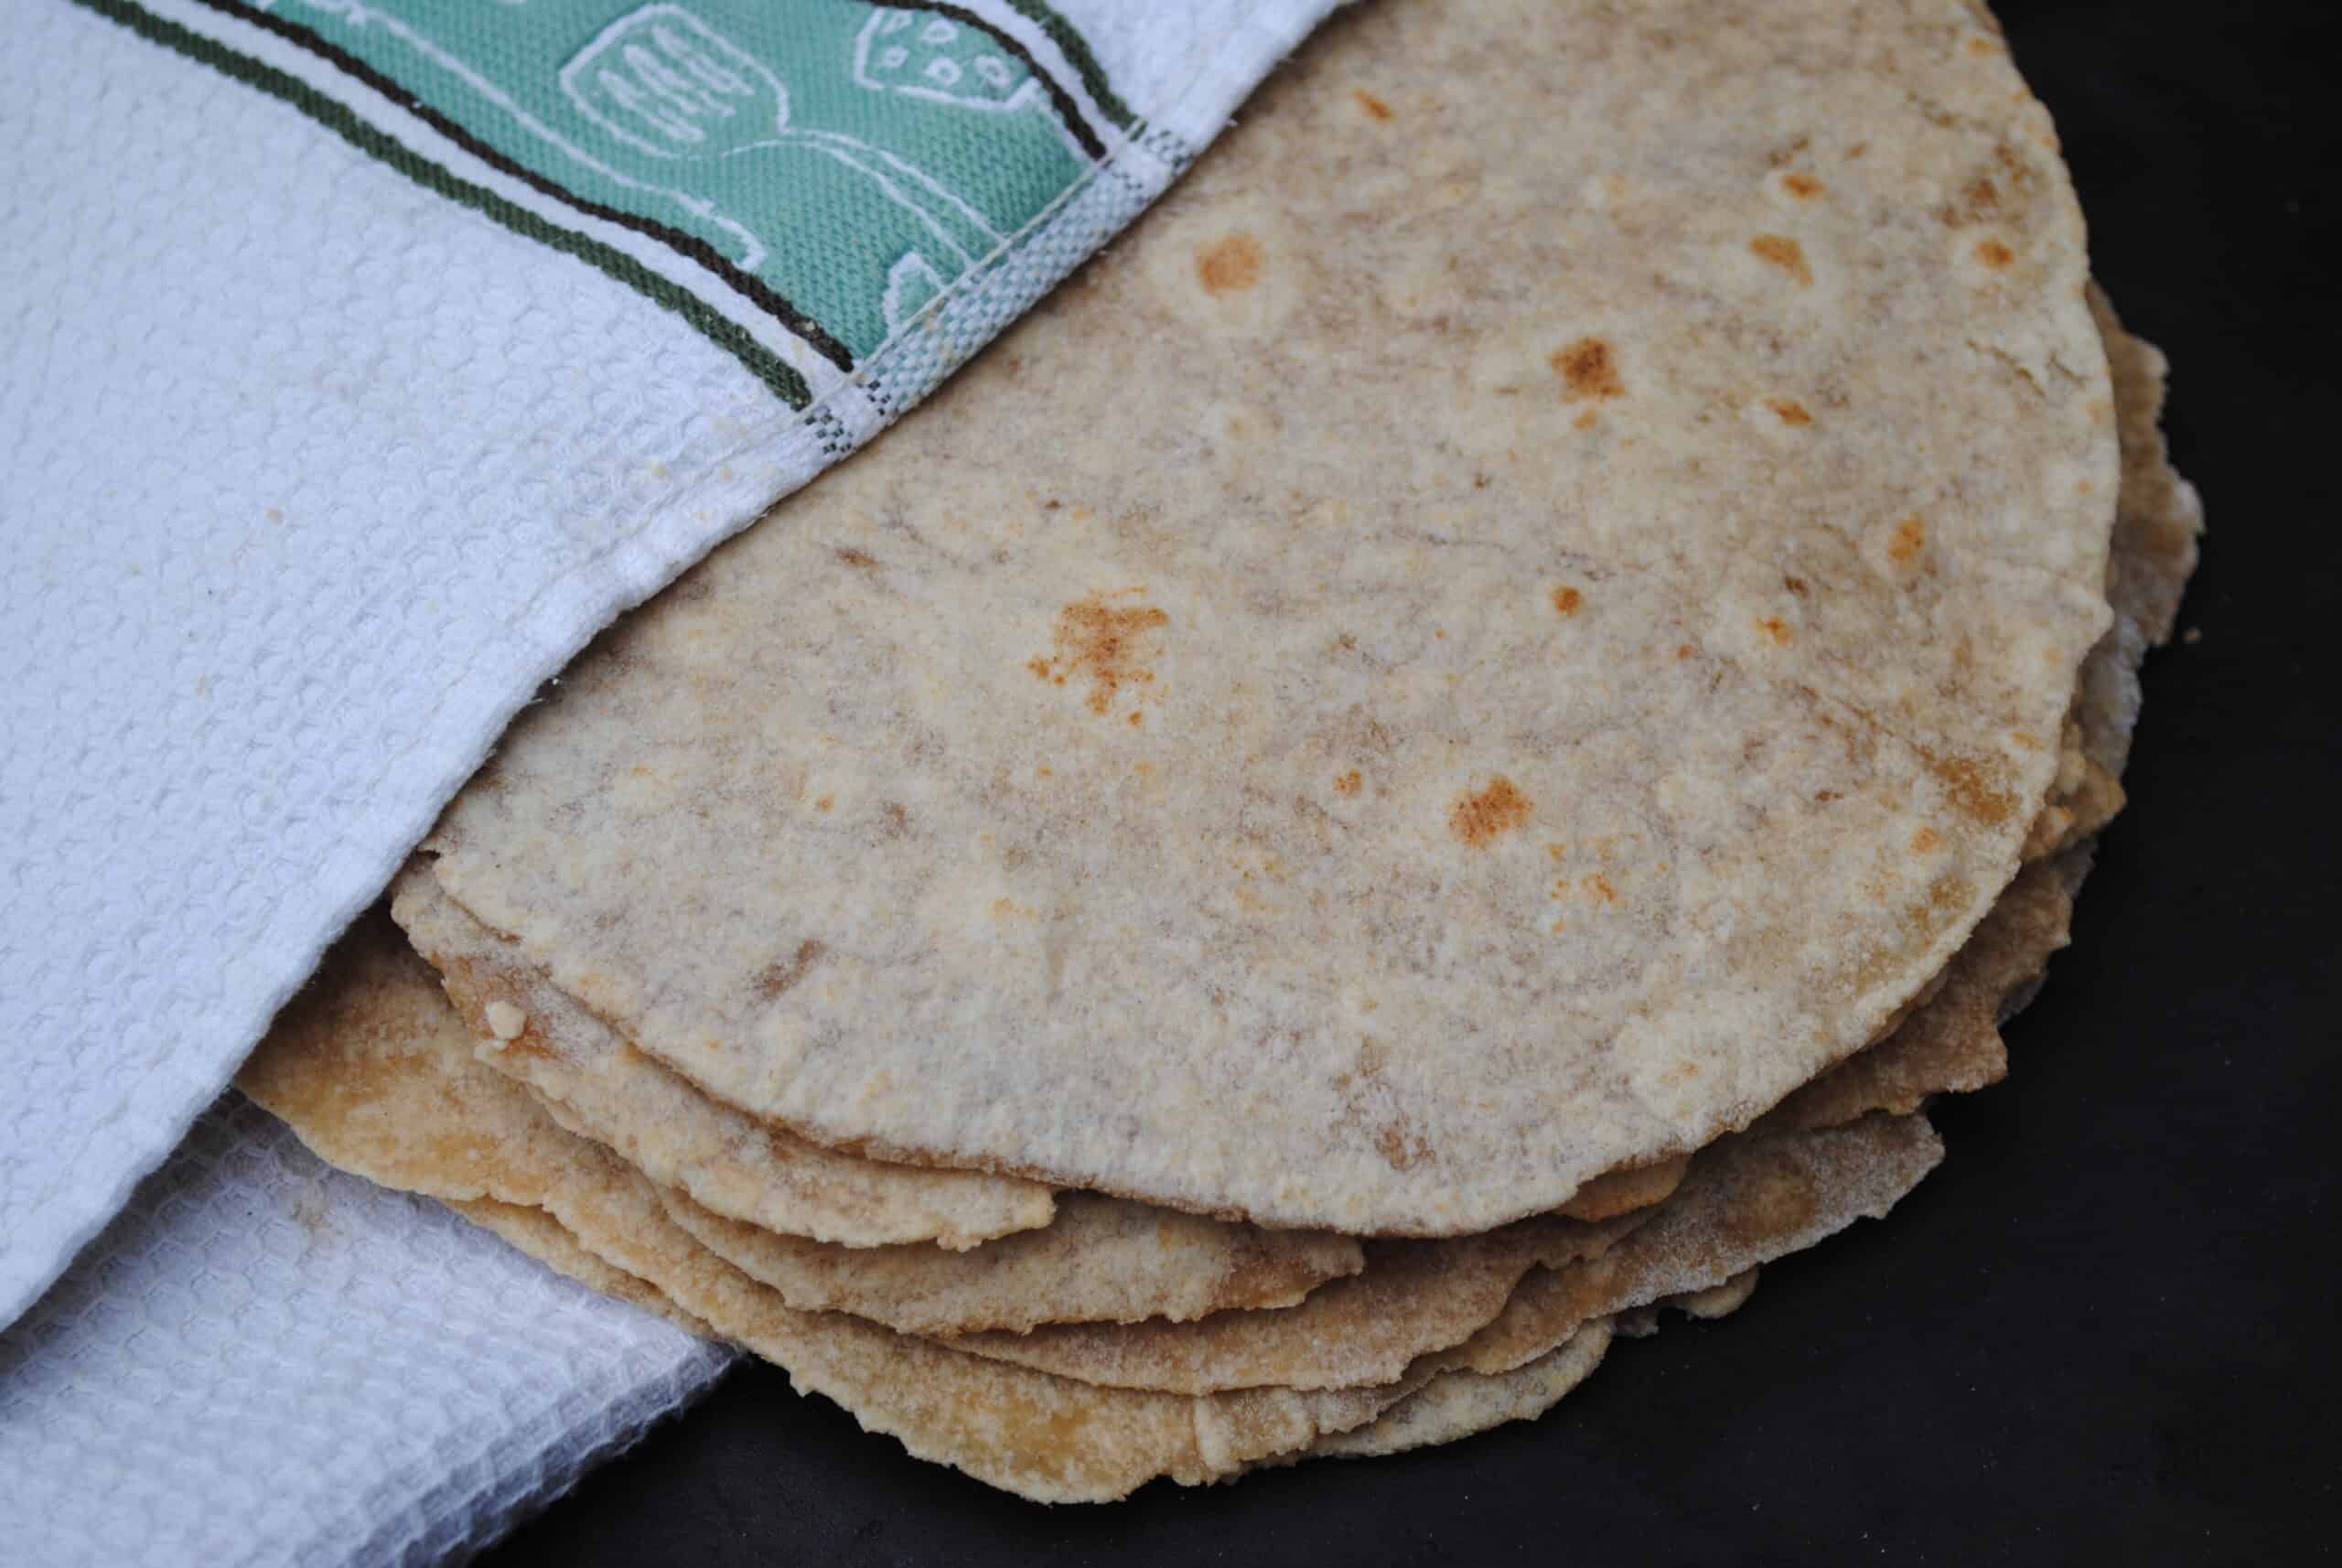 homemade whole wheat tortillas wrapped in a towel